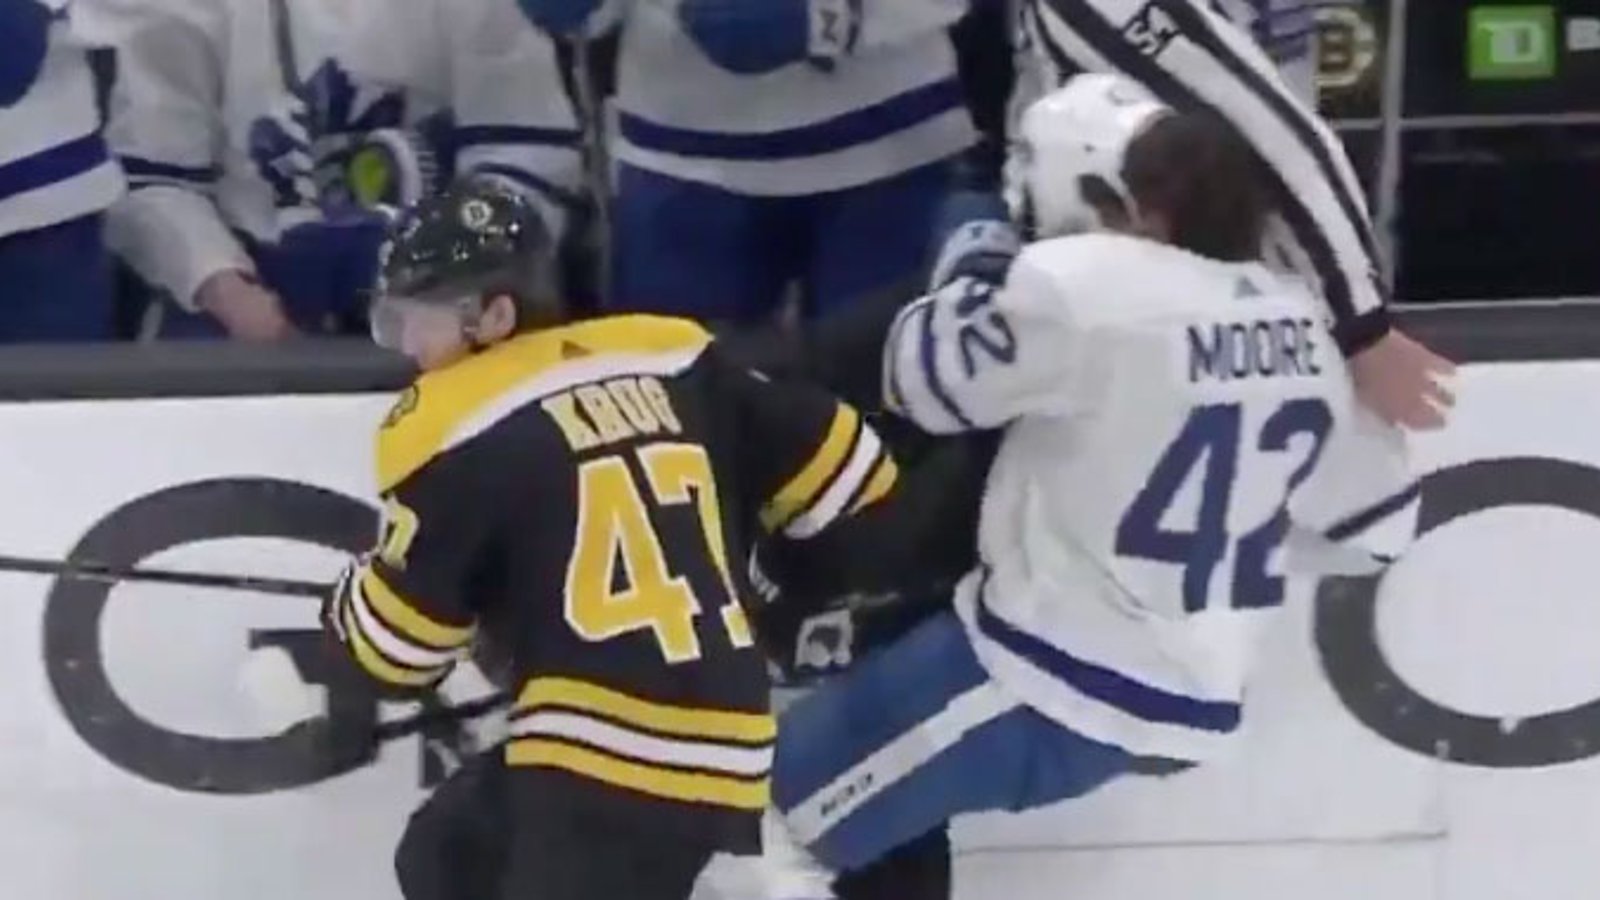 Krug takes out Moore and a referee at the same time! 